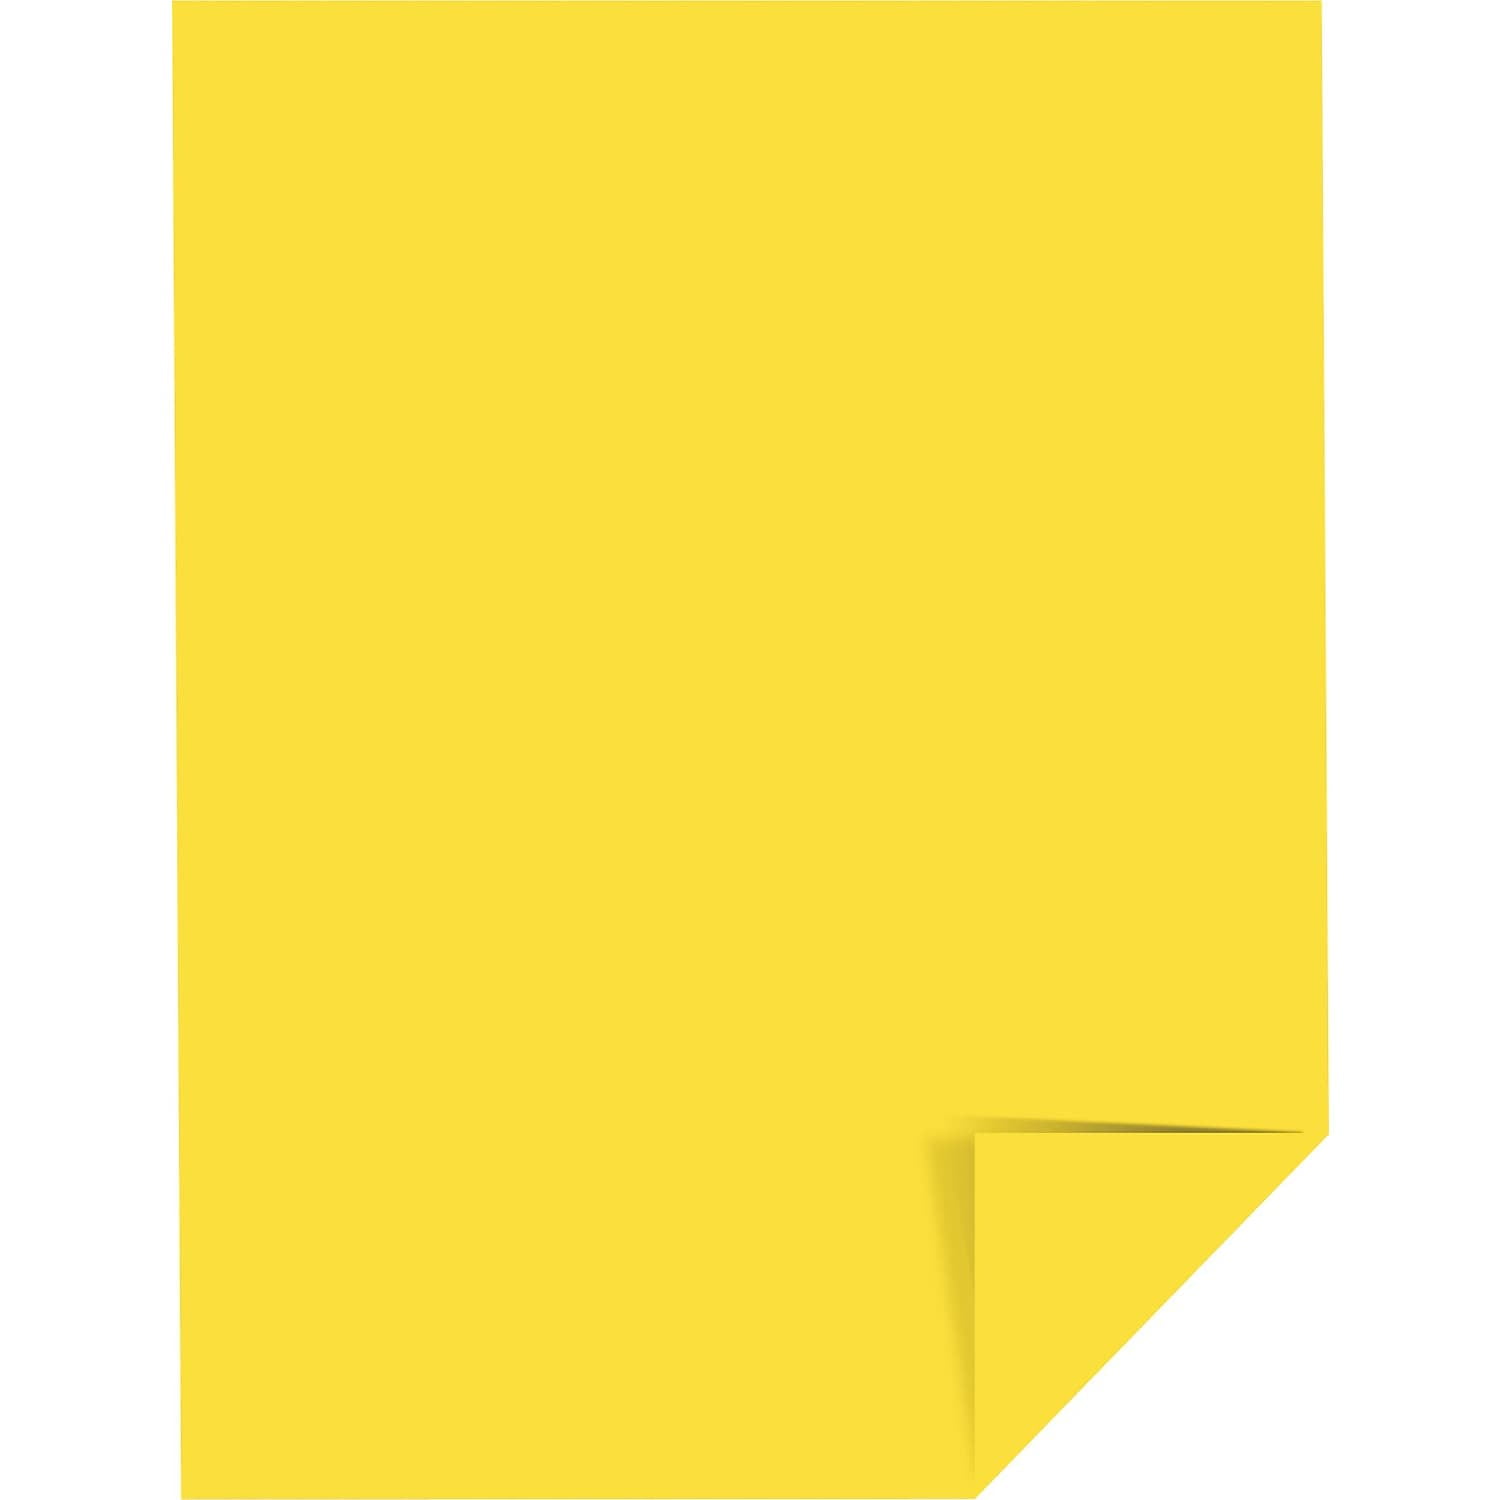 Astrobrights 21538 Acid-Free Copy Paper Solar Yellow Pack of 500 24 lb 8.5 Width 2.5 Height 11 Length 